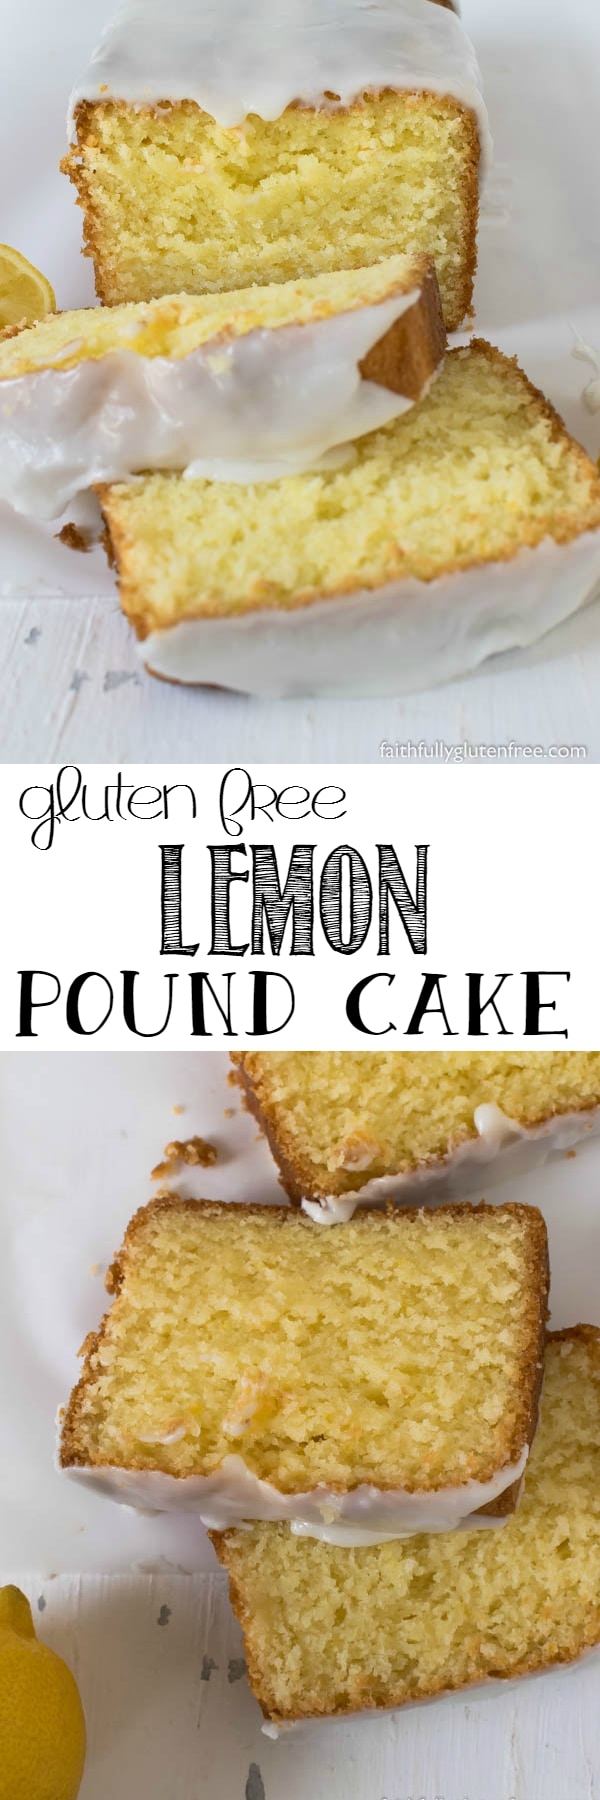 This Gluten Free Lemon Pound Cake, drizzled with a tart lemony glaze, is the perfect dessert, afternoon snack, or little "something special" in your kid's lunch kit.